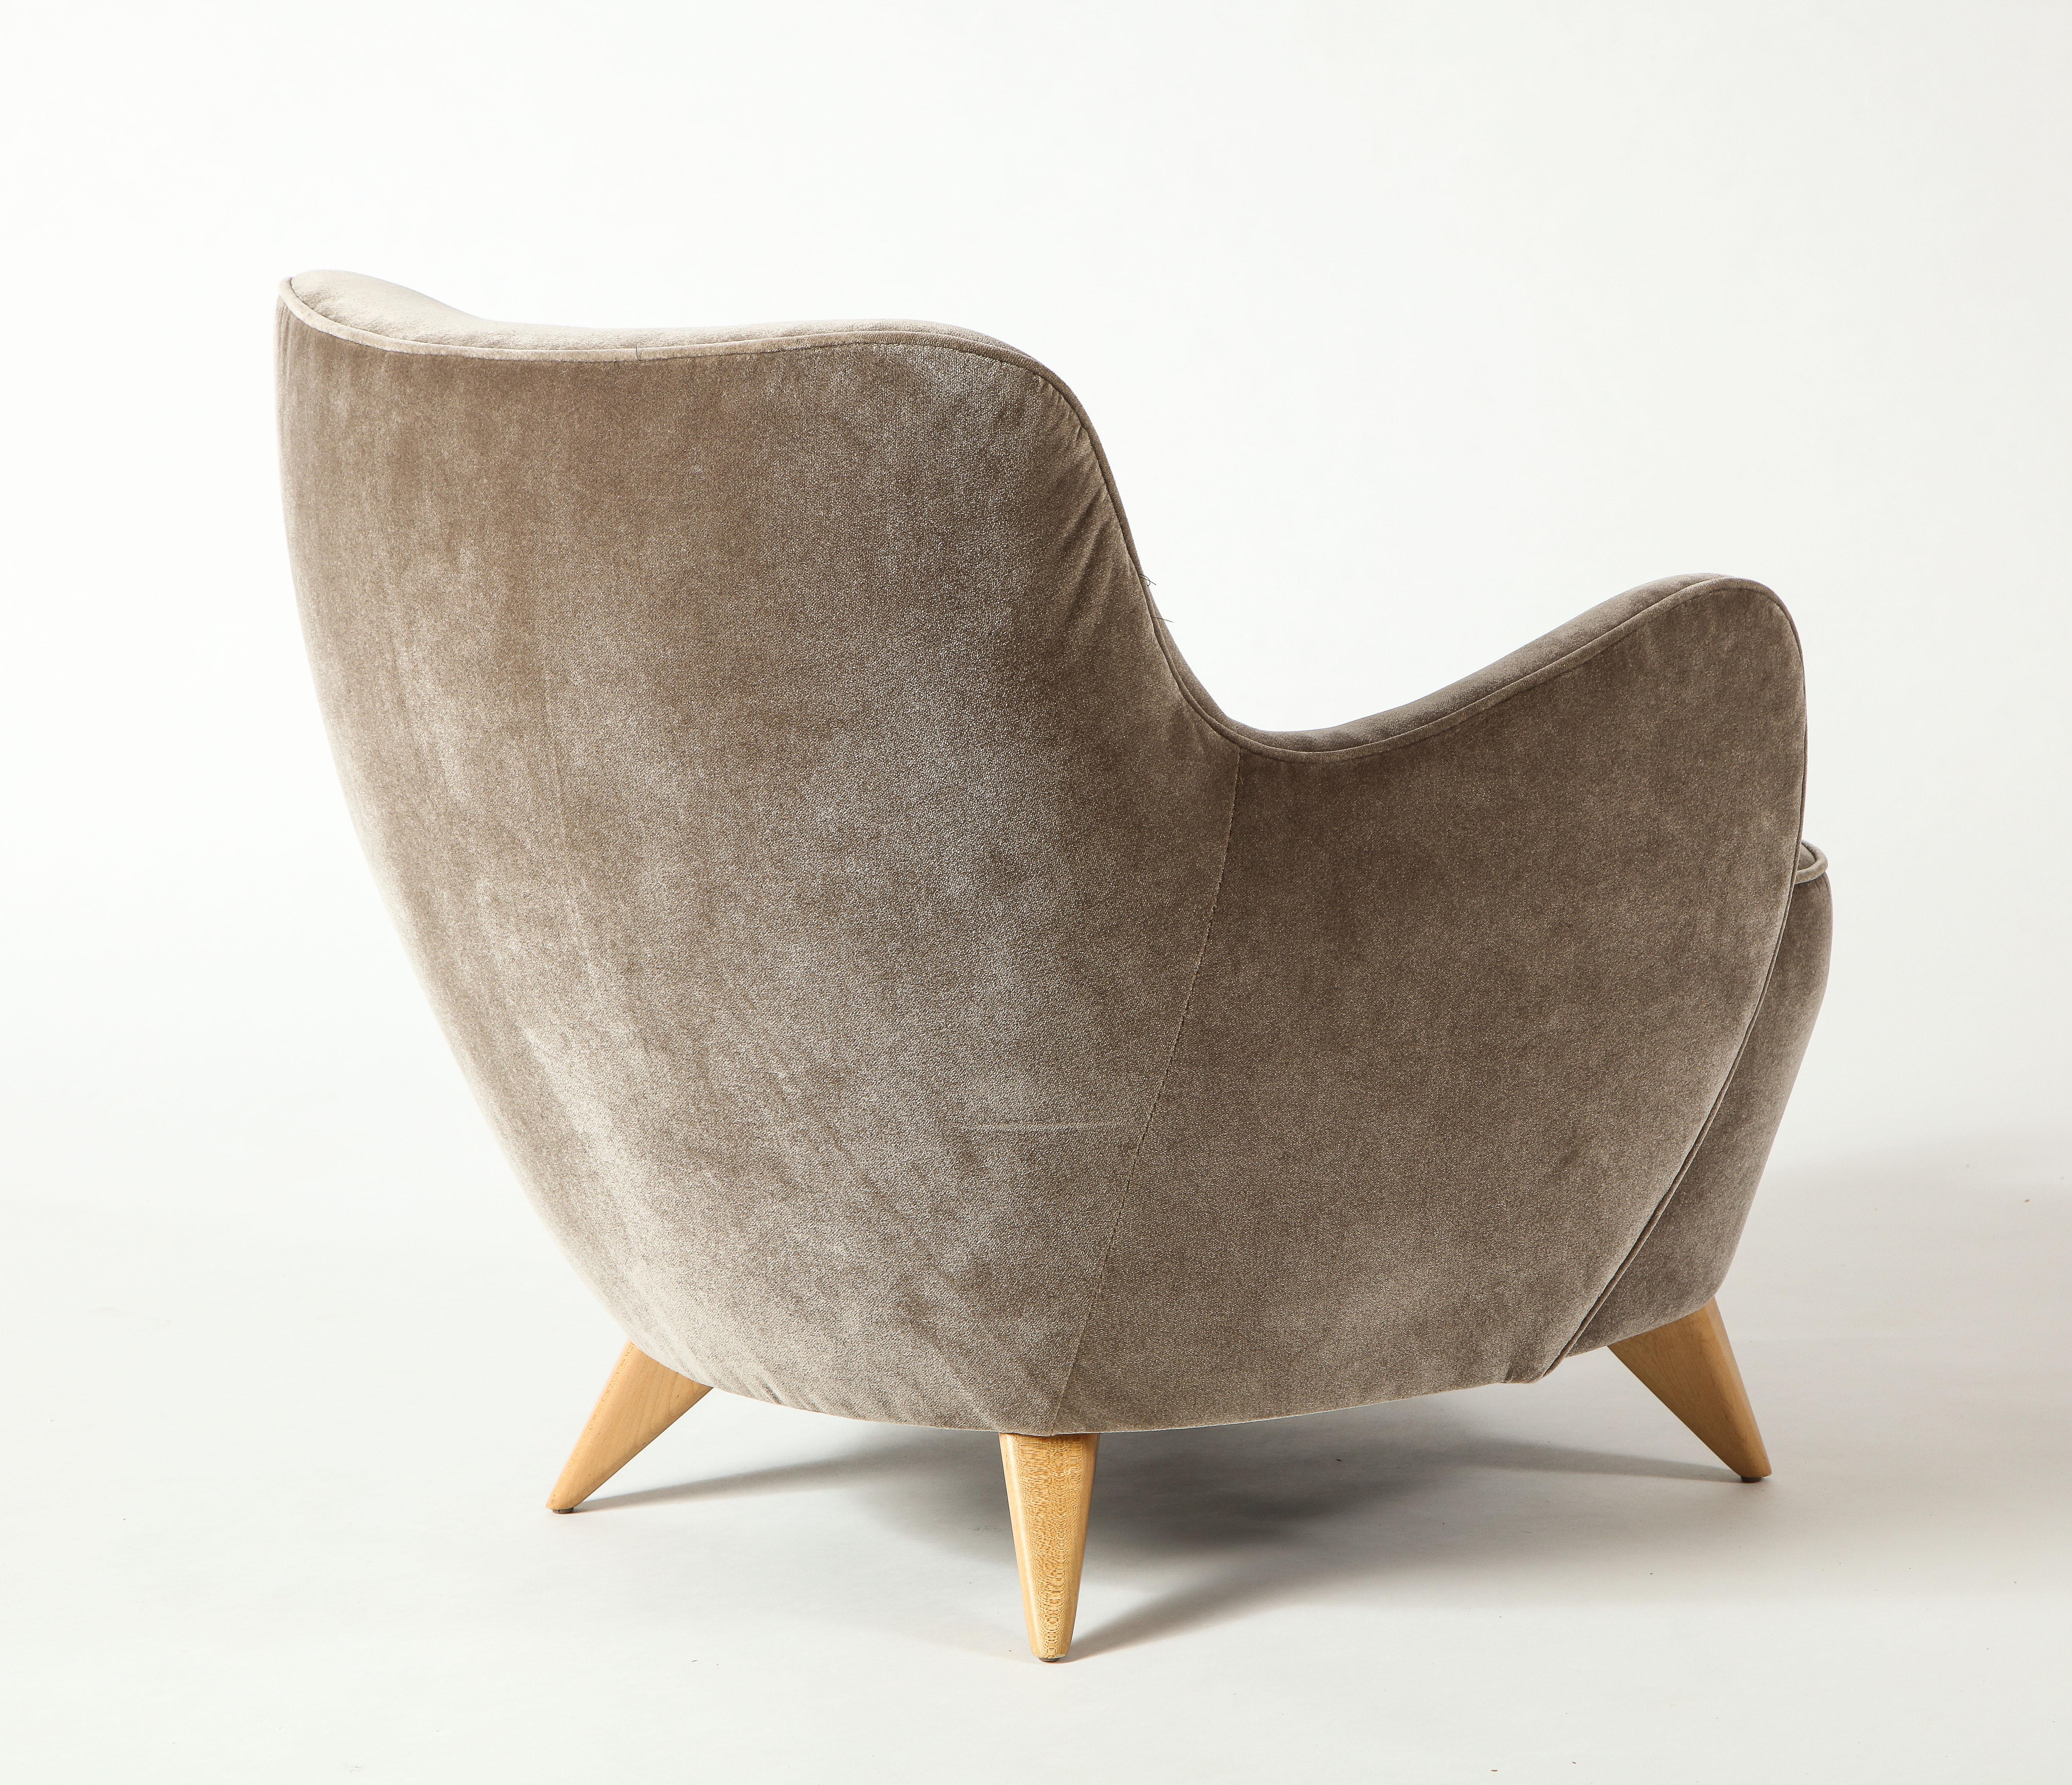 Contemporary Vladimir Kagan Barrel Chair in Beige Upholstery with Natural Maple Base